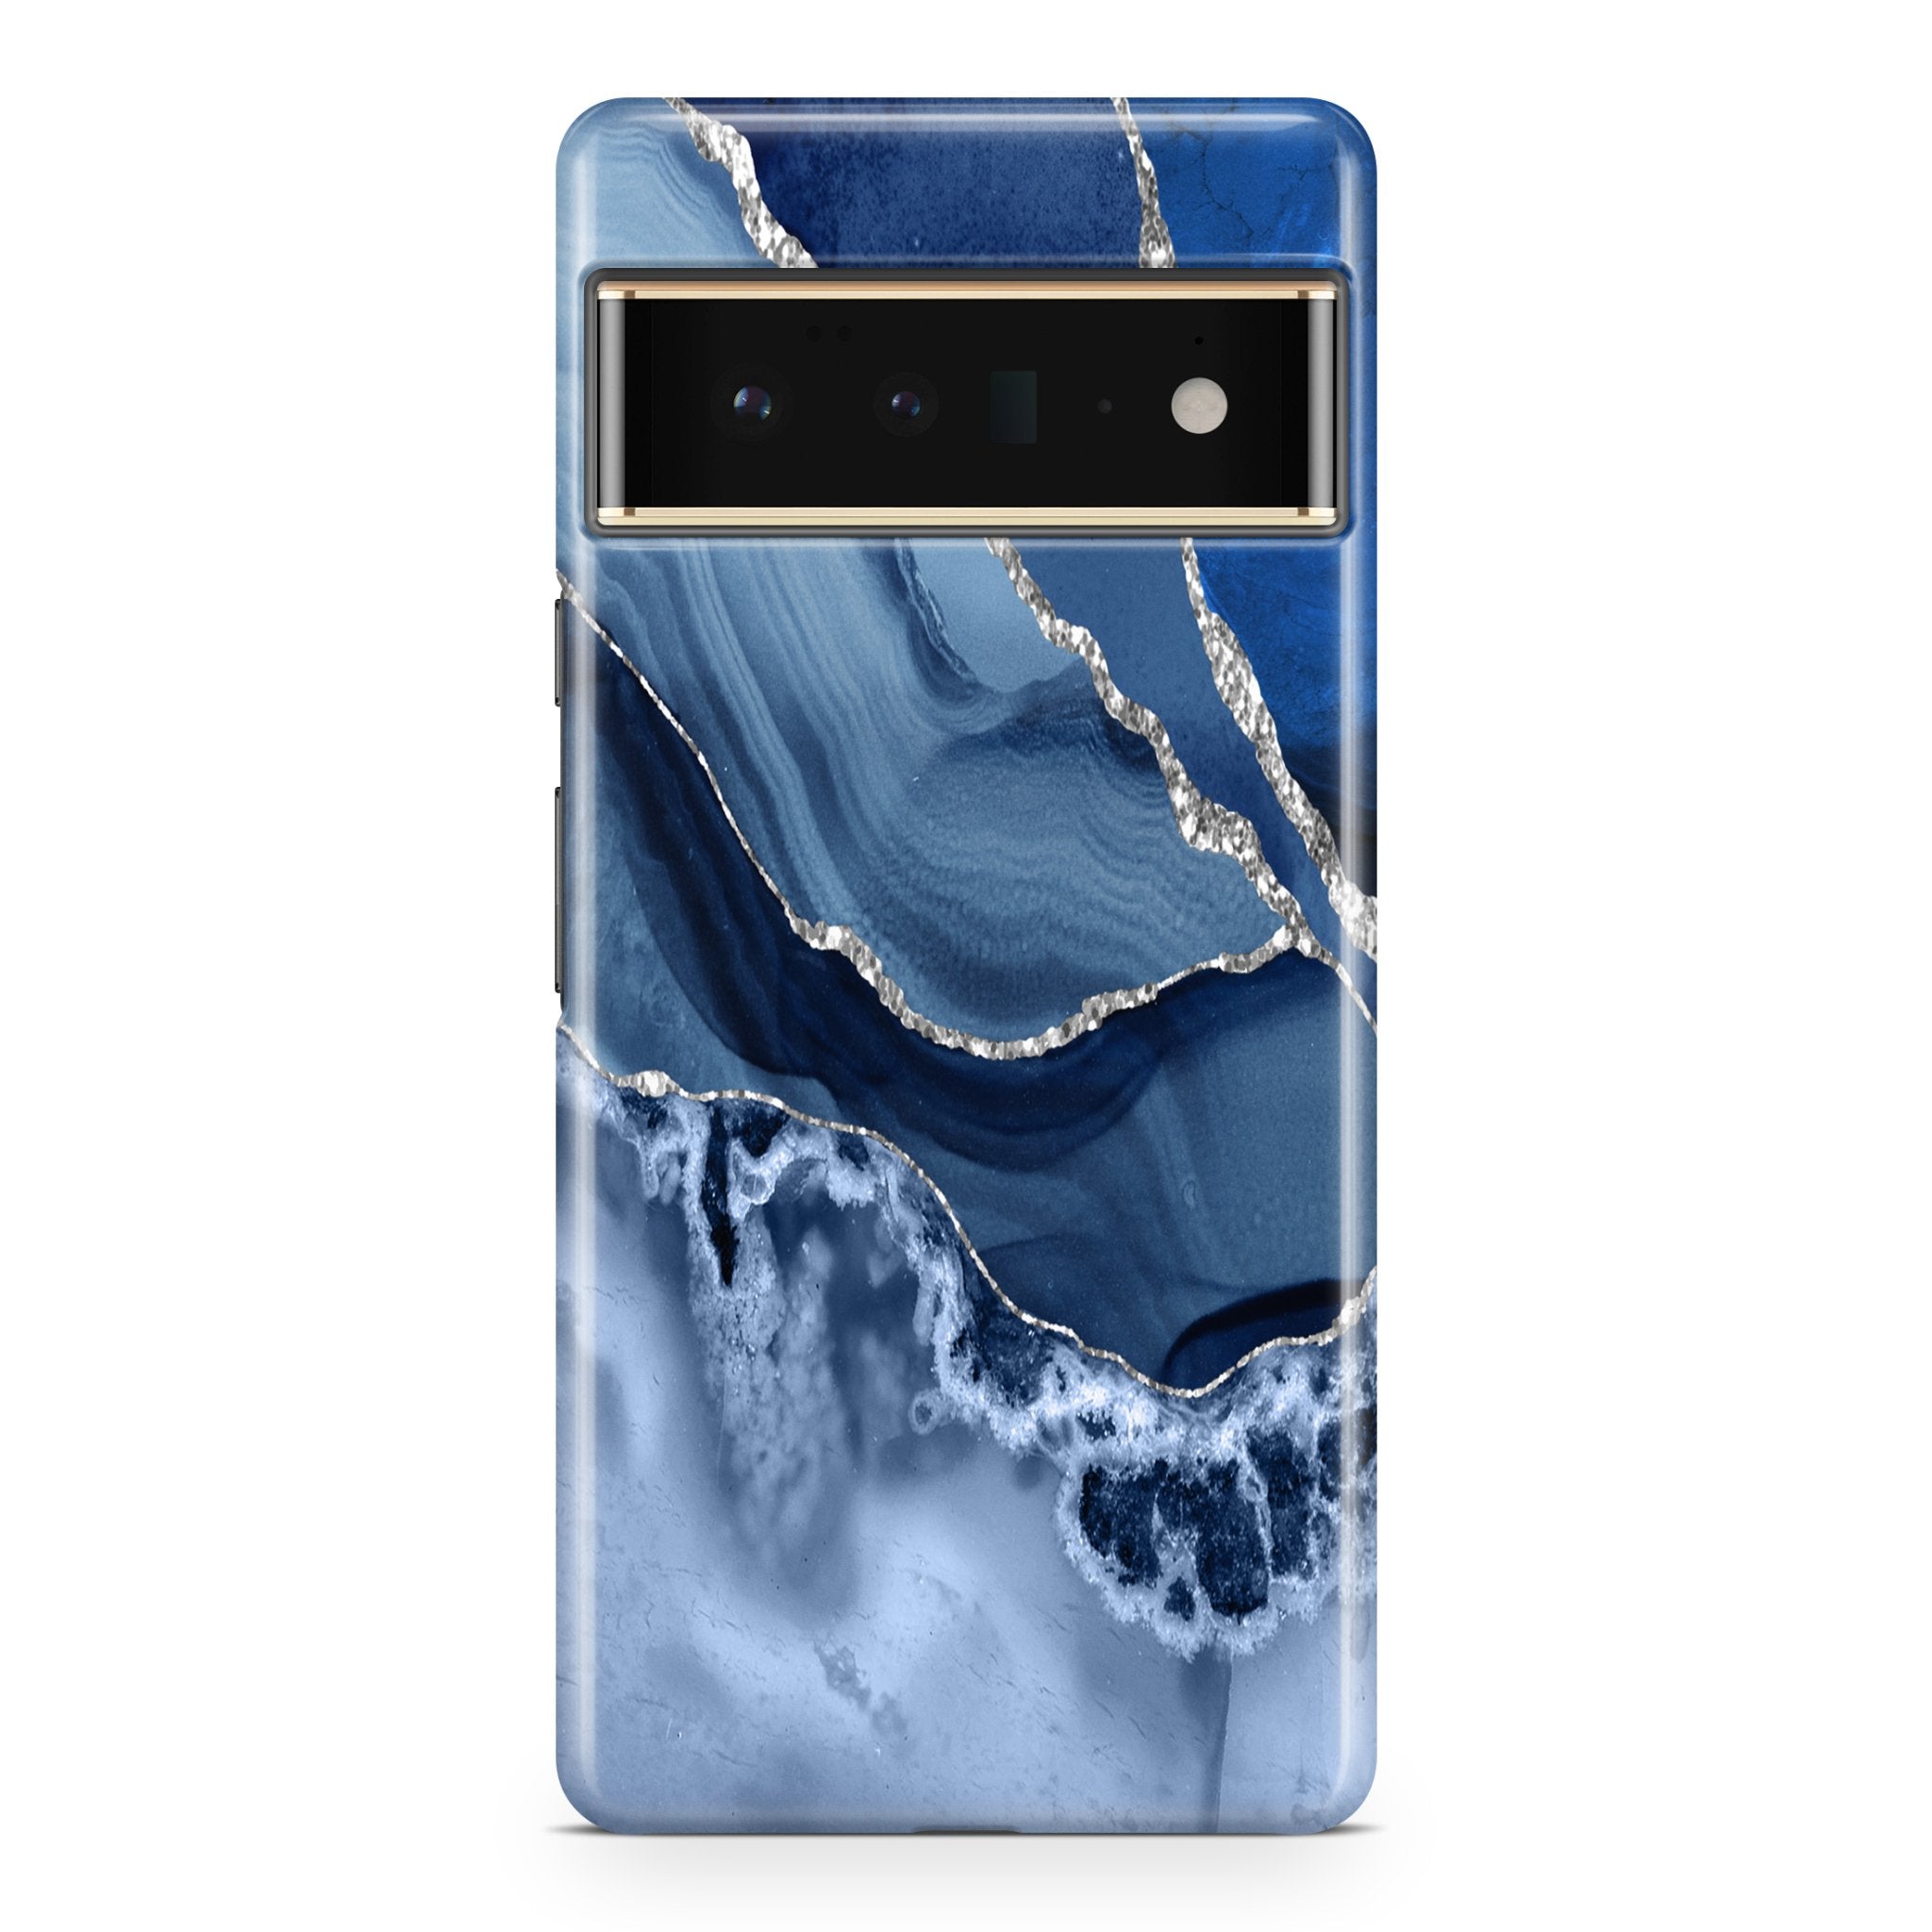 Navy Elegance IV - Google phone case designs by CaseSwagger